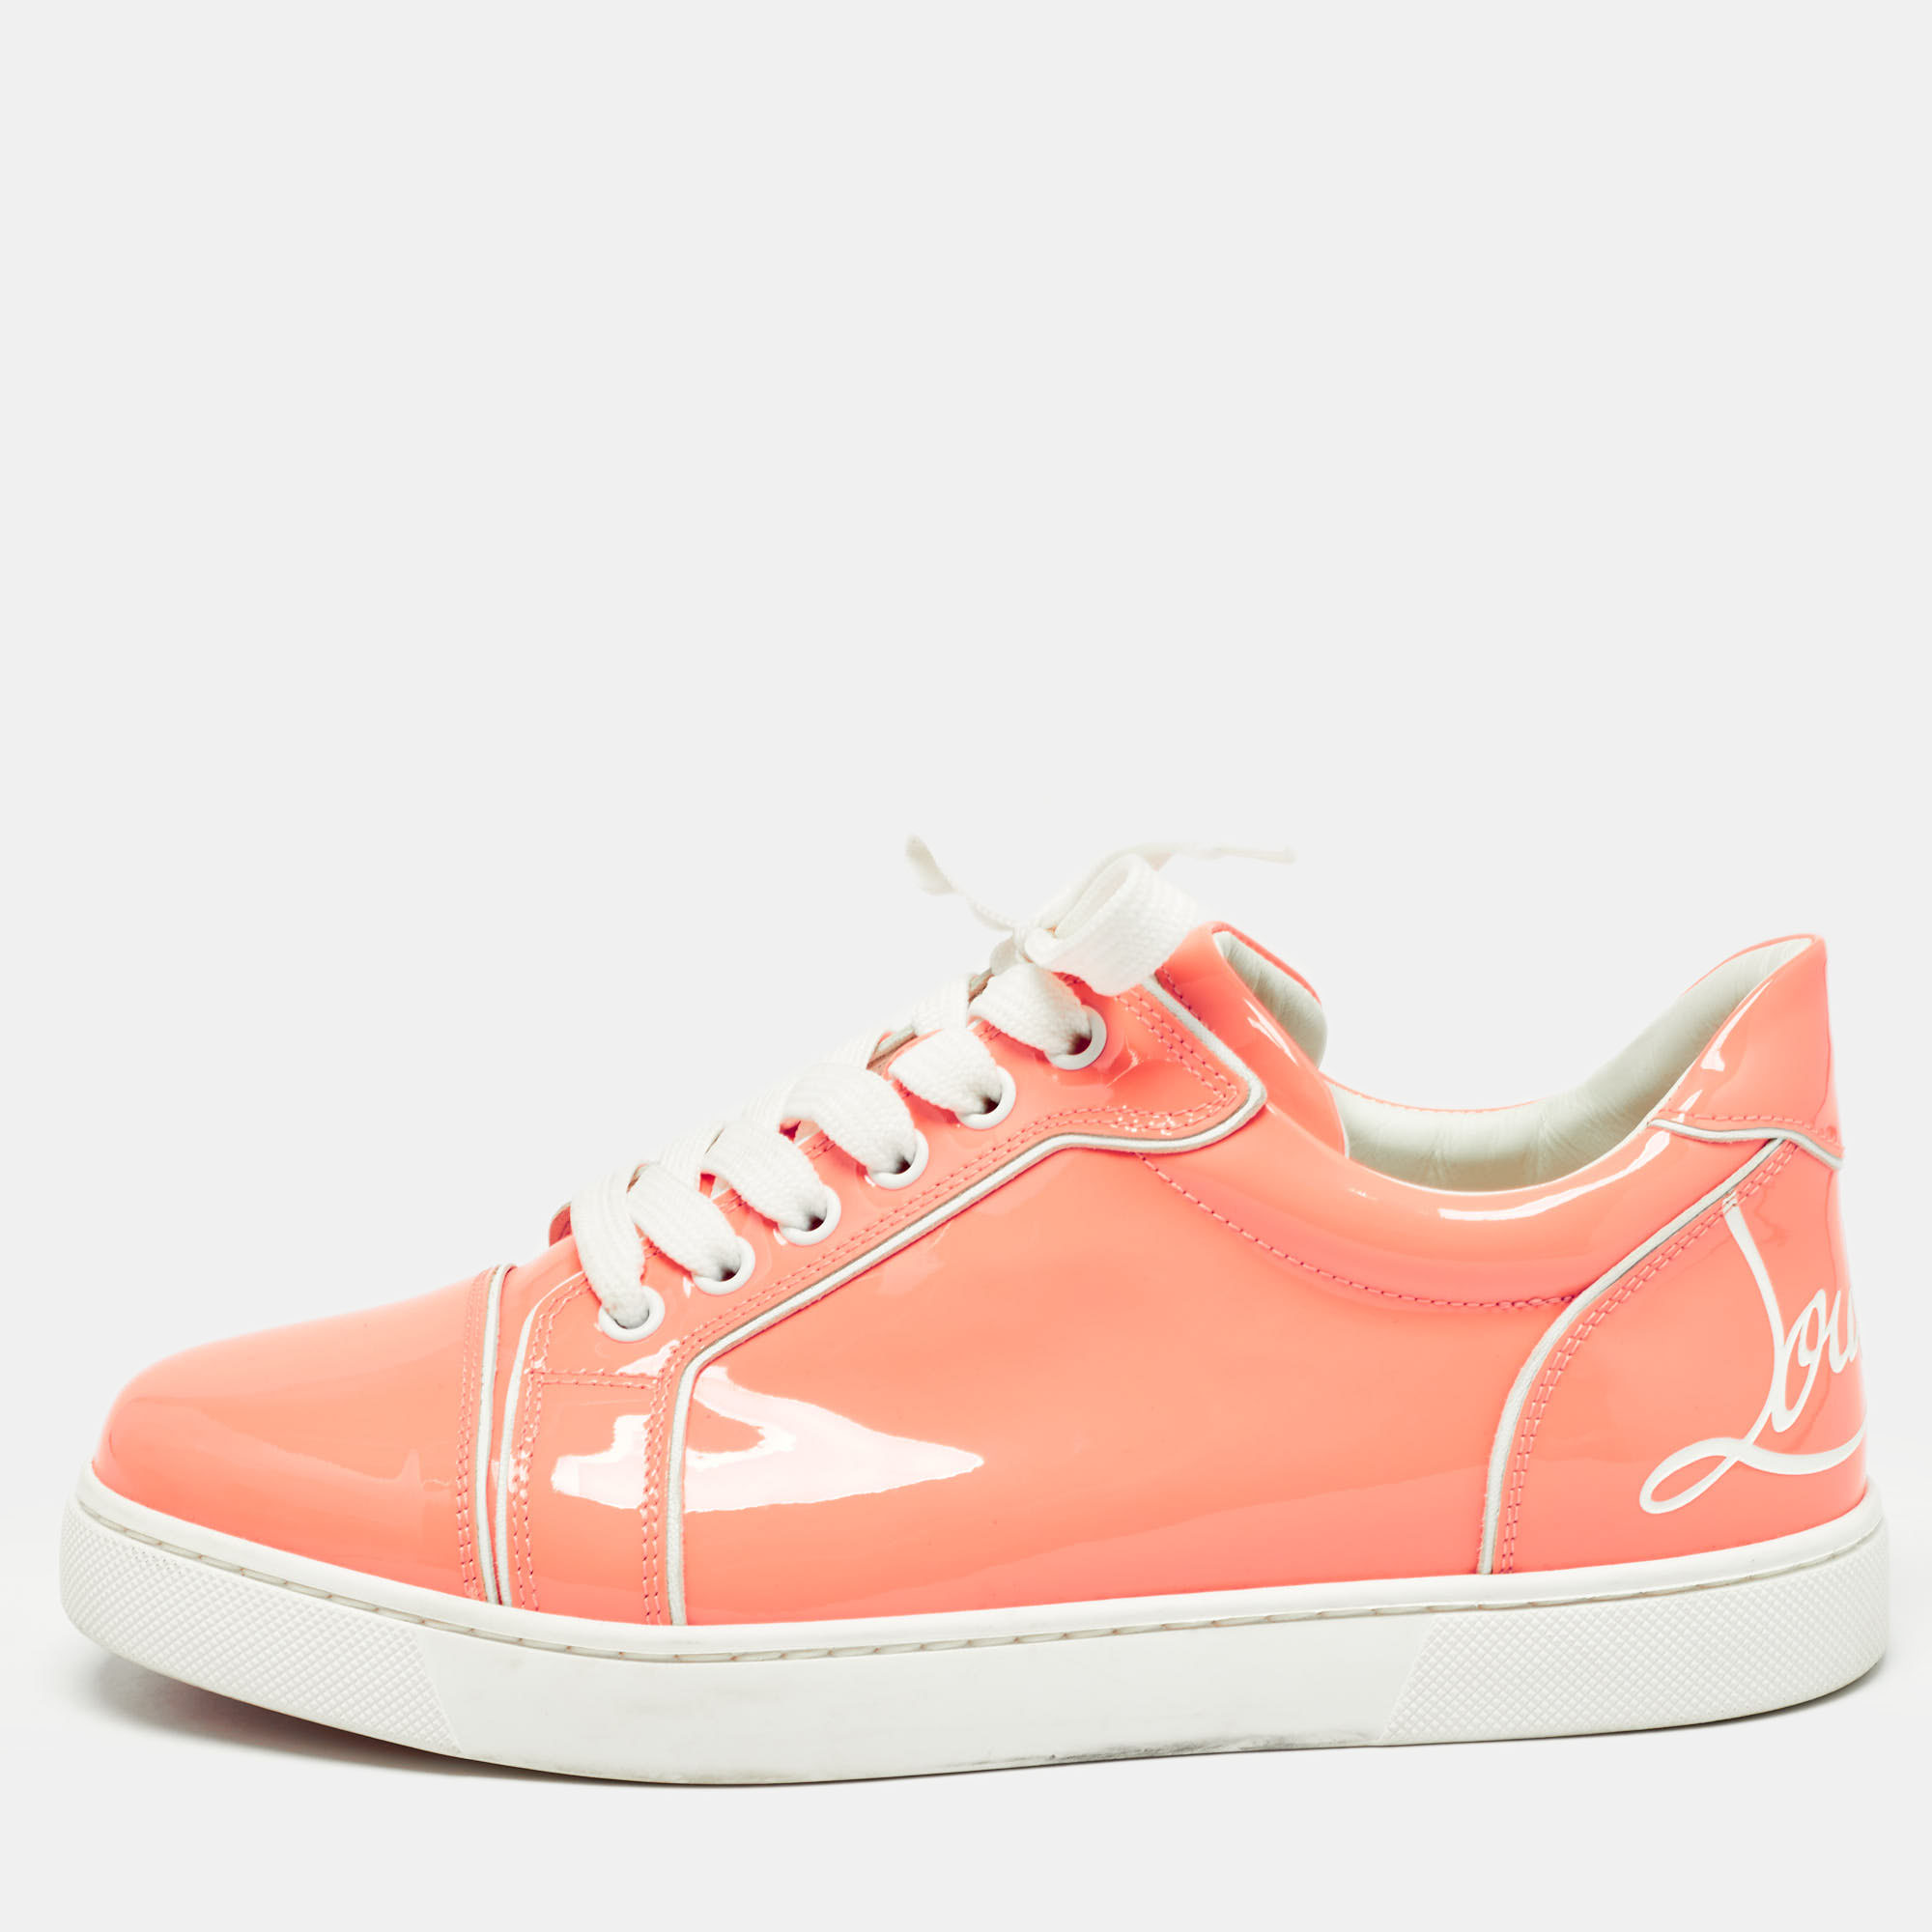 Christian louboutin light orange patent leather louis junior low top sneakers size 39